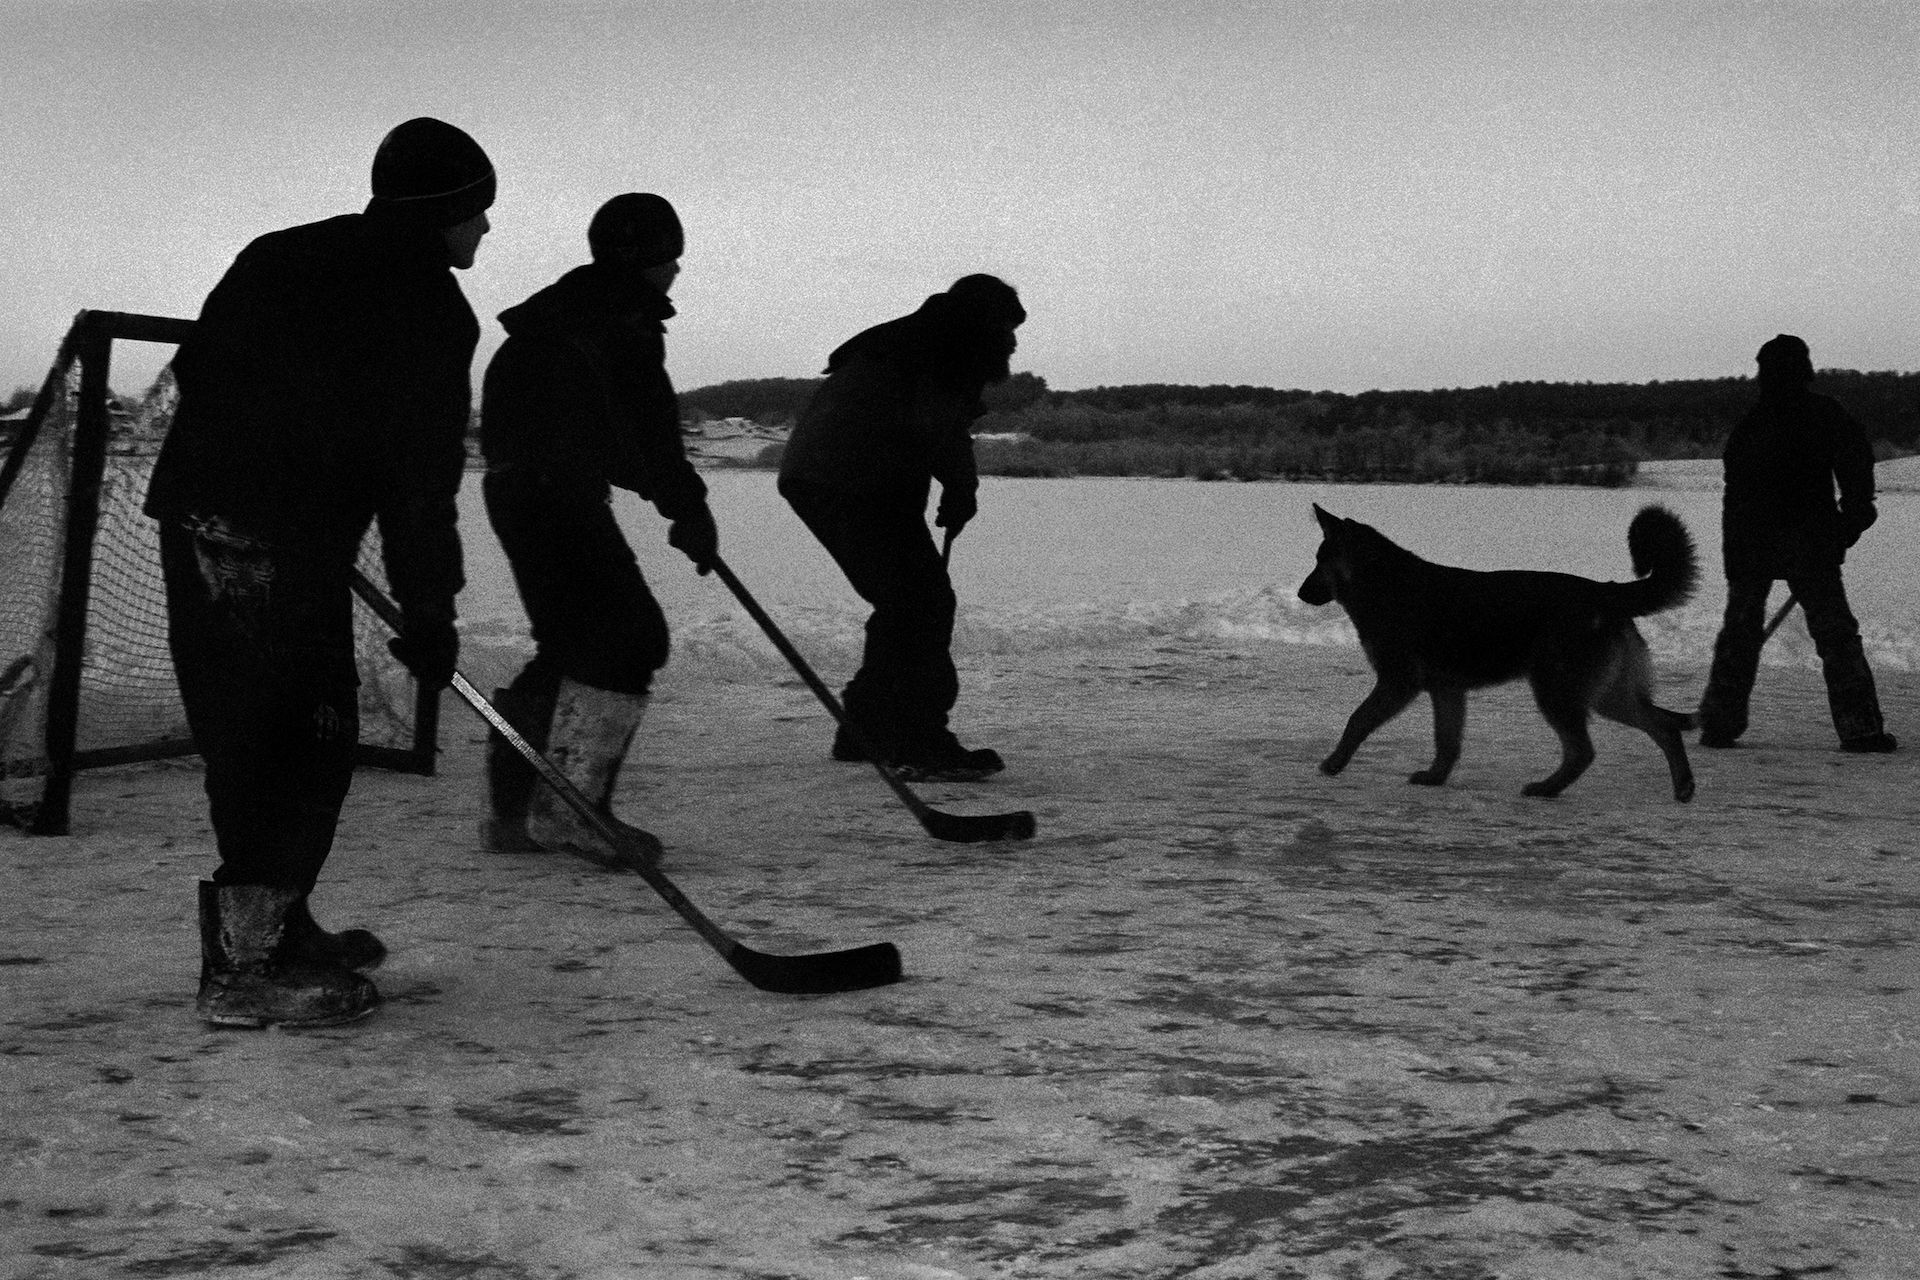 Hockey on the lake, village of Pogost, Pudozh district, Karelia, Russia (2009)